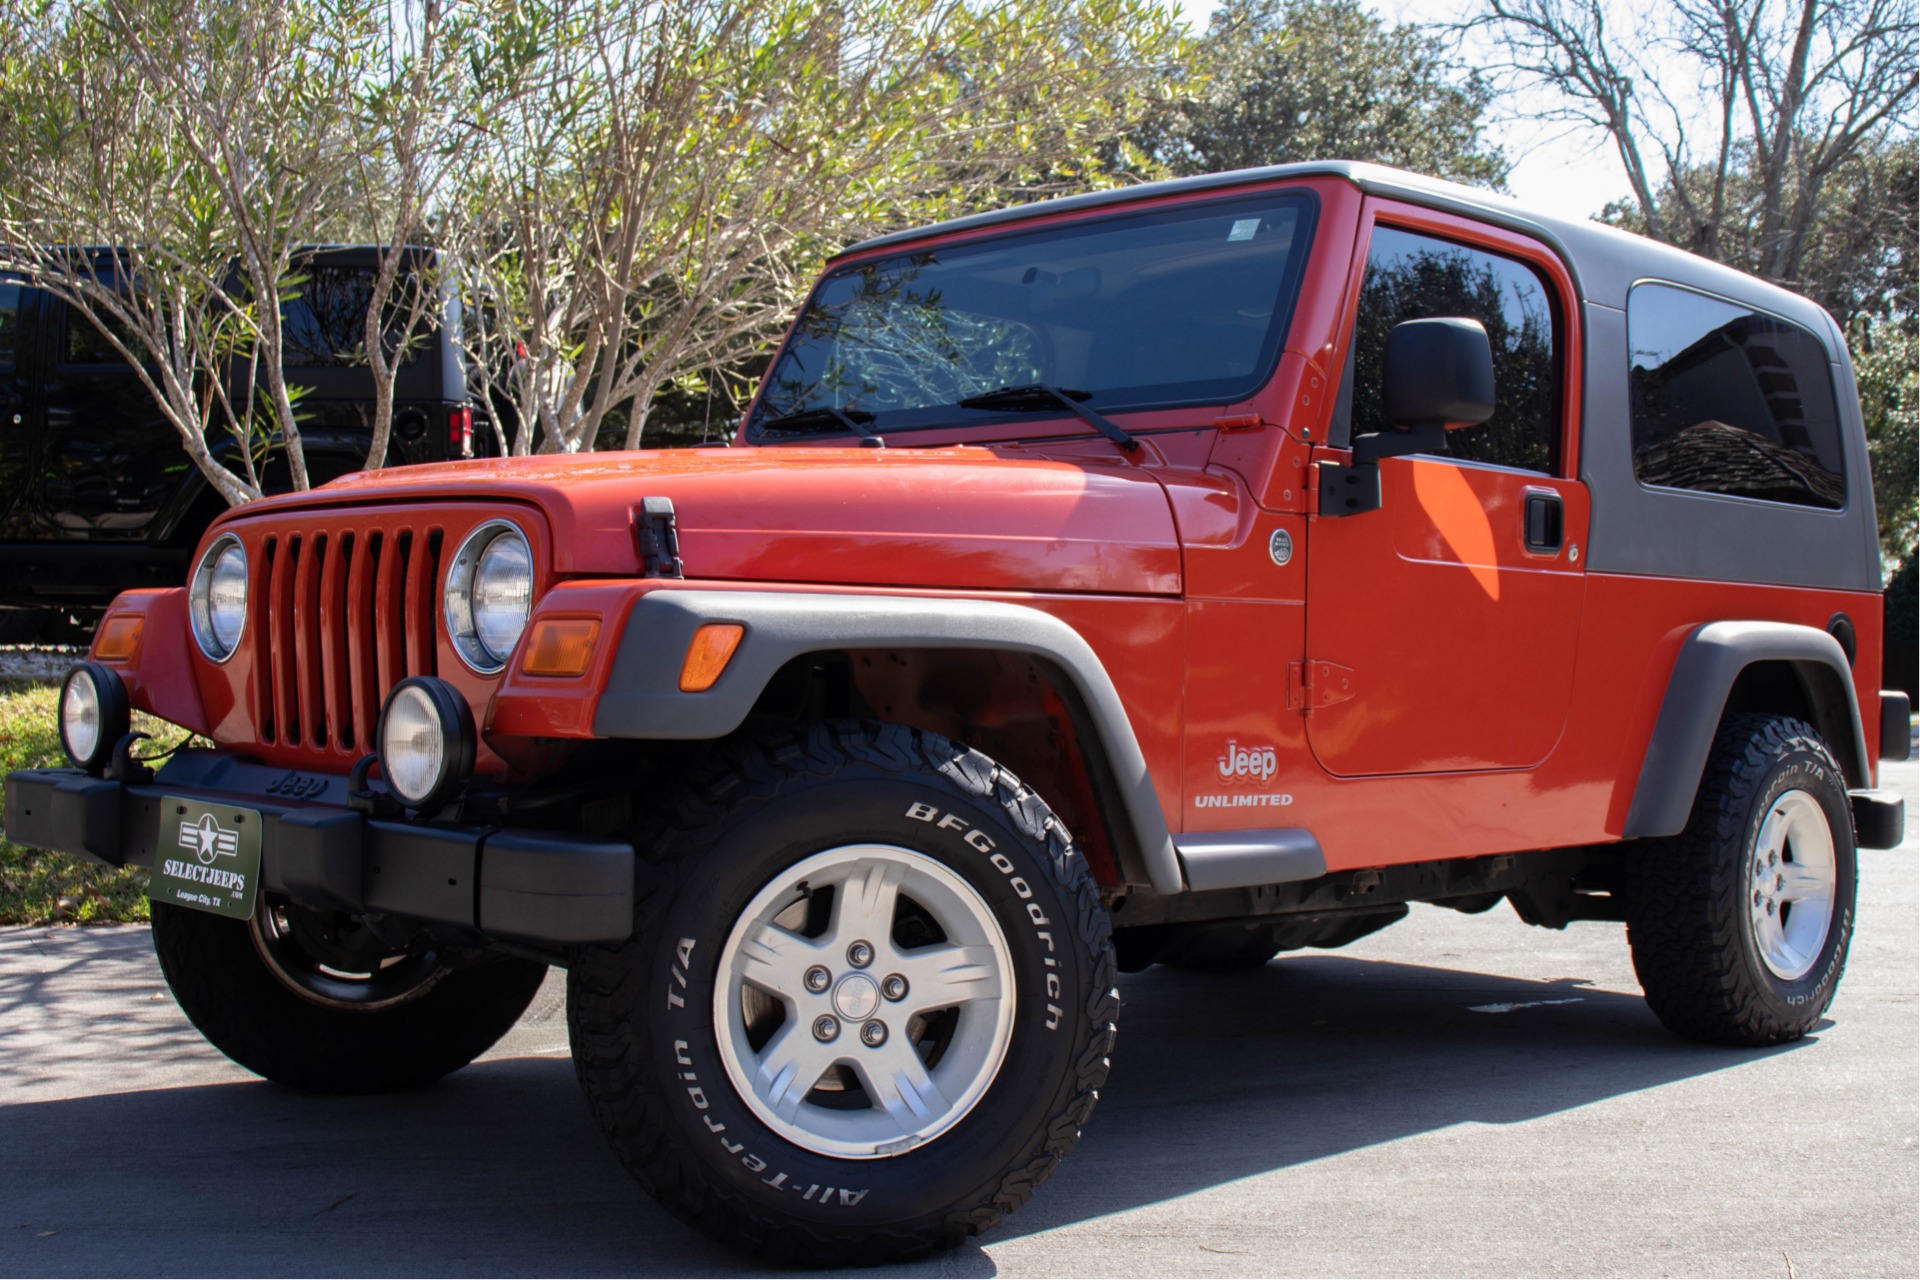 Used 2005 Jeep Wrangler Unlimited For Sale ($20,995) | Select Jeeps Inc.  Stock #312477